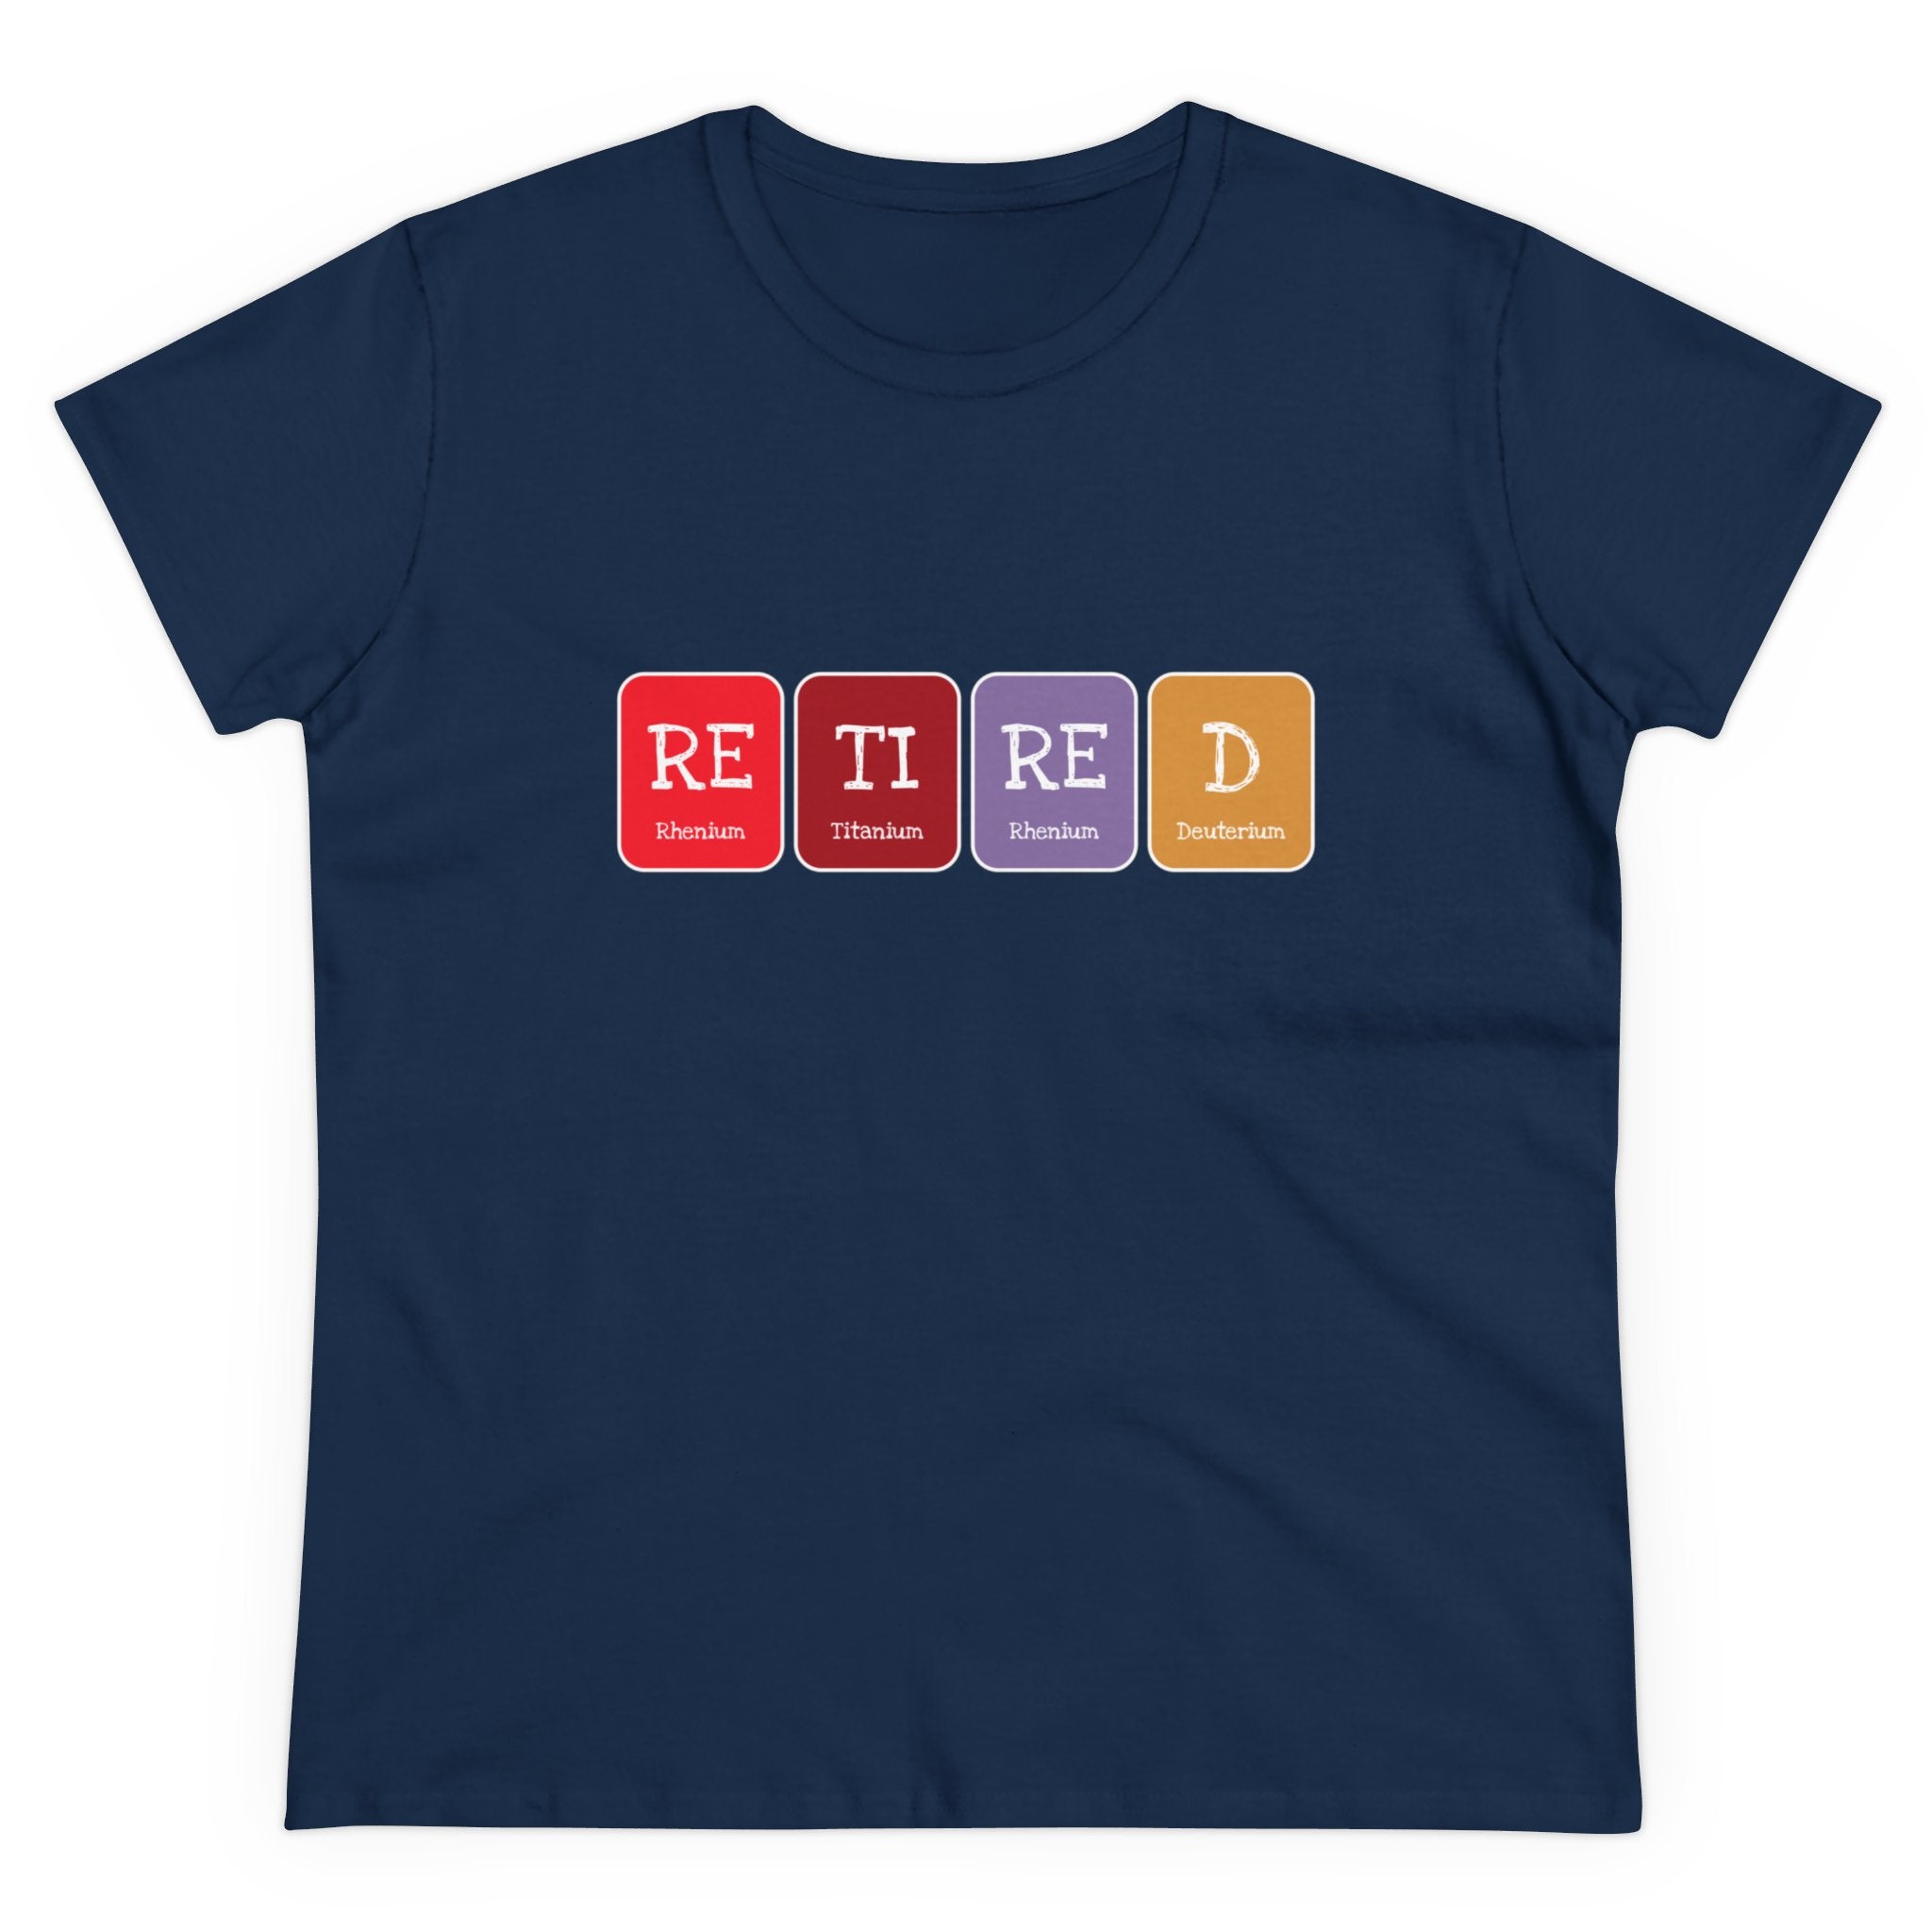 Retired - Women's Tee with a design featuring the word "RETIRED" spelled out using red, purple, and orange tiles resembling chemical element symbols. Perfect for all weather.